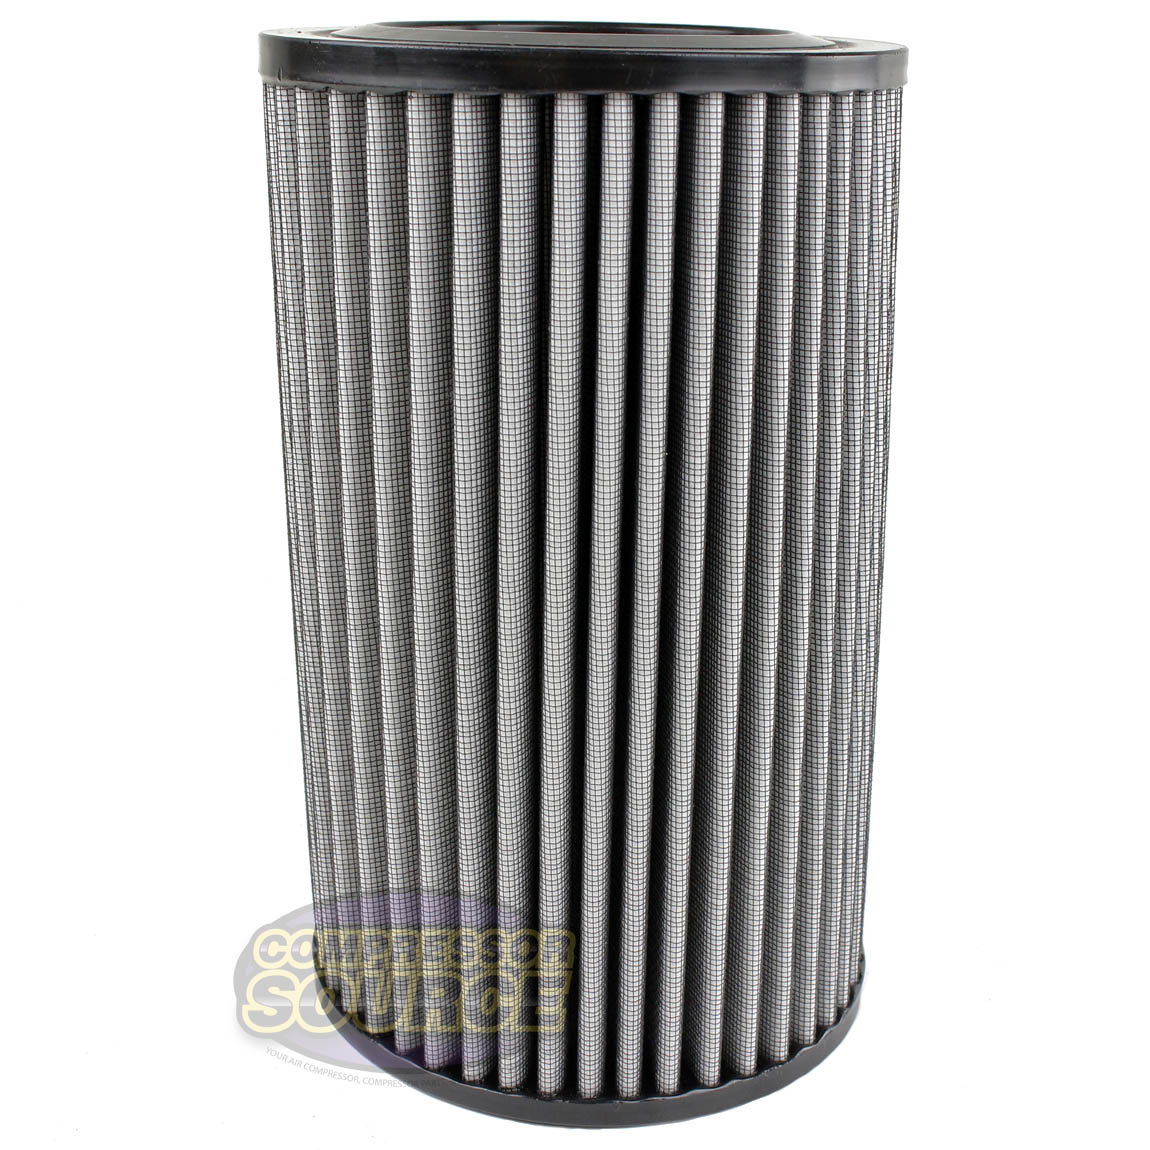 AP435 Solberg Style Intake Filter Polyester Element Pre Filter Solberg #231P